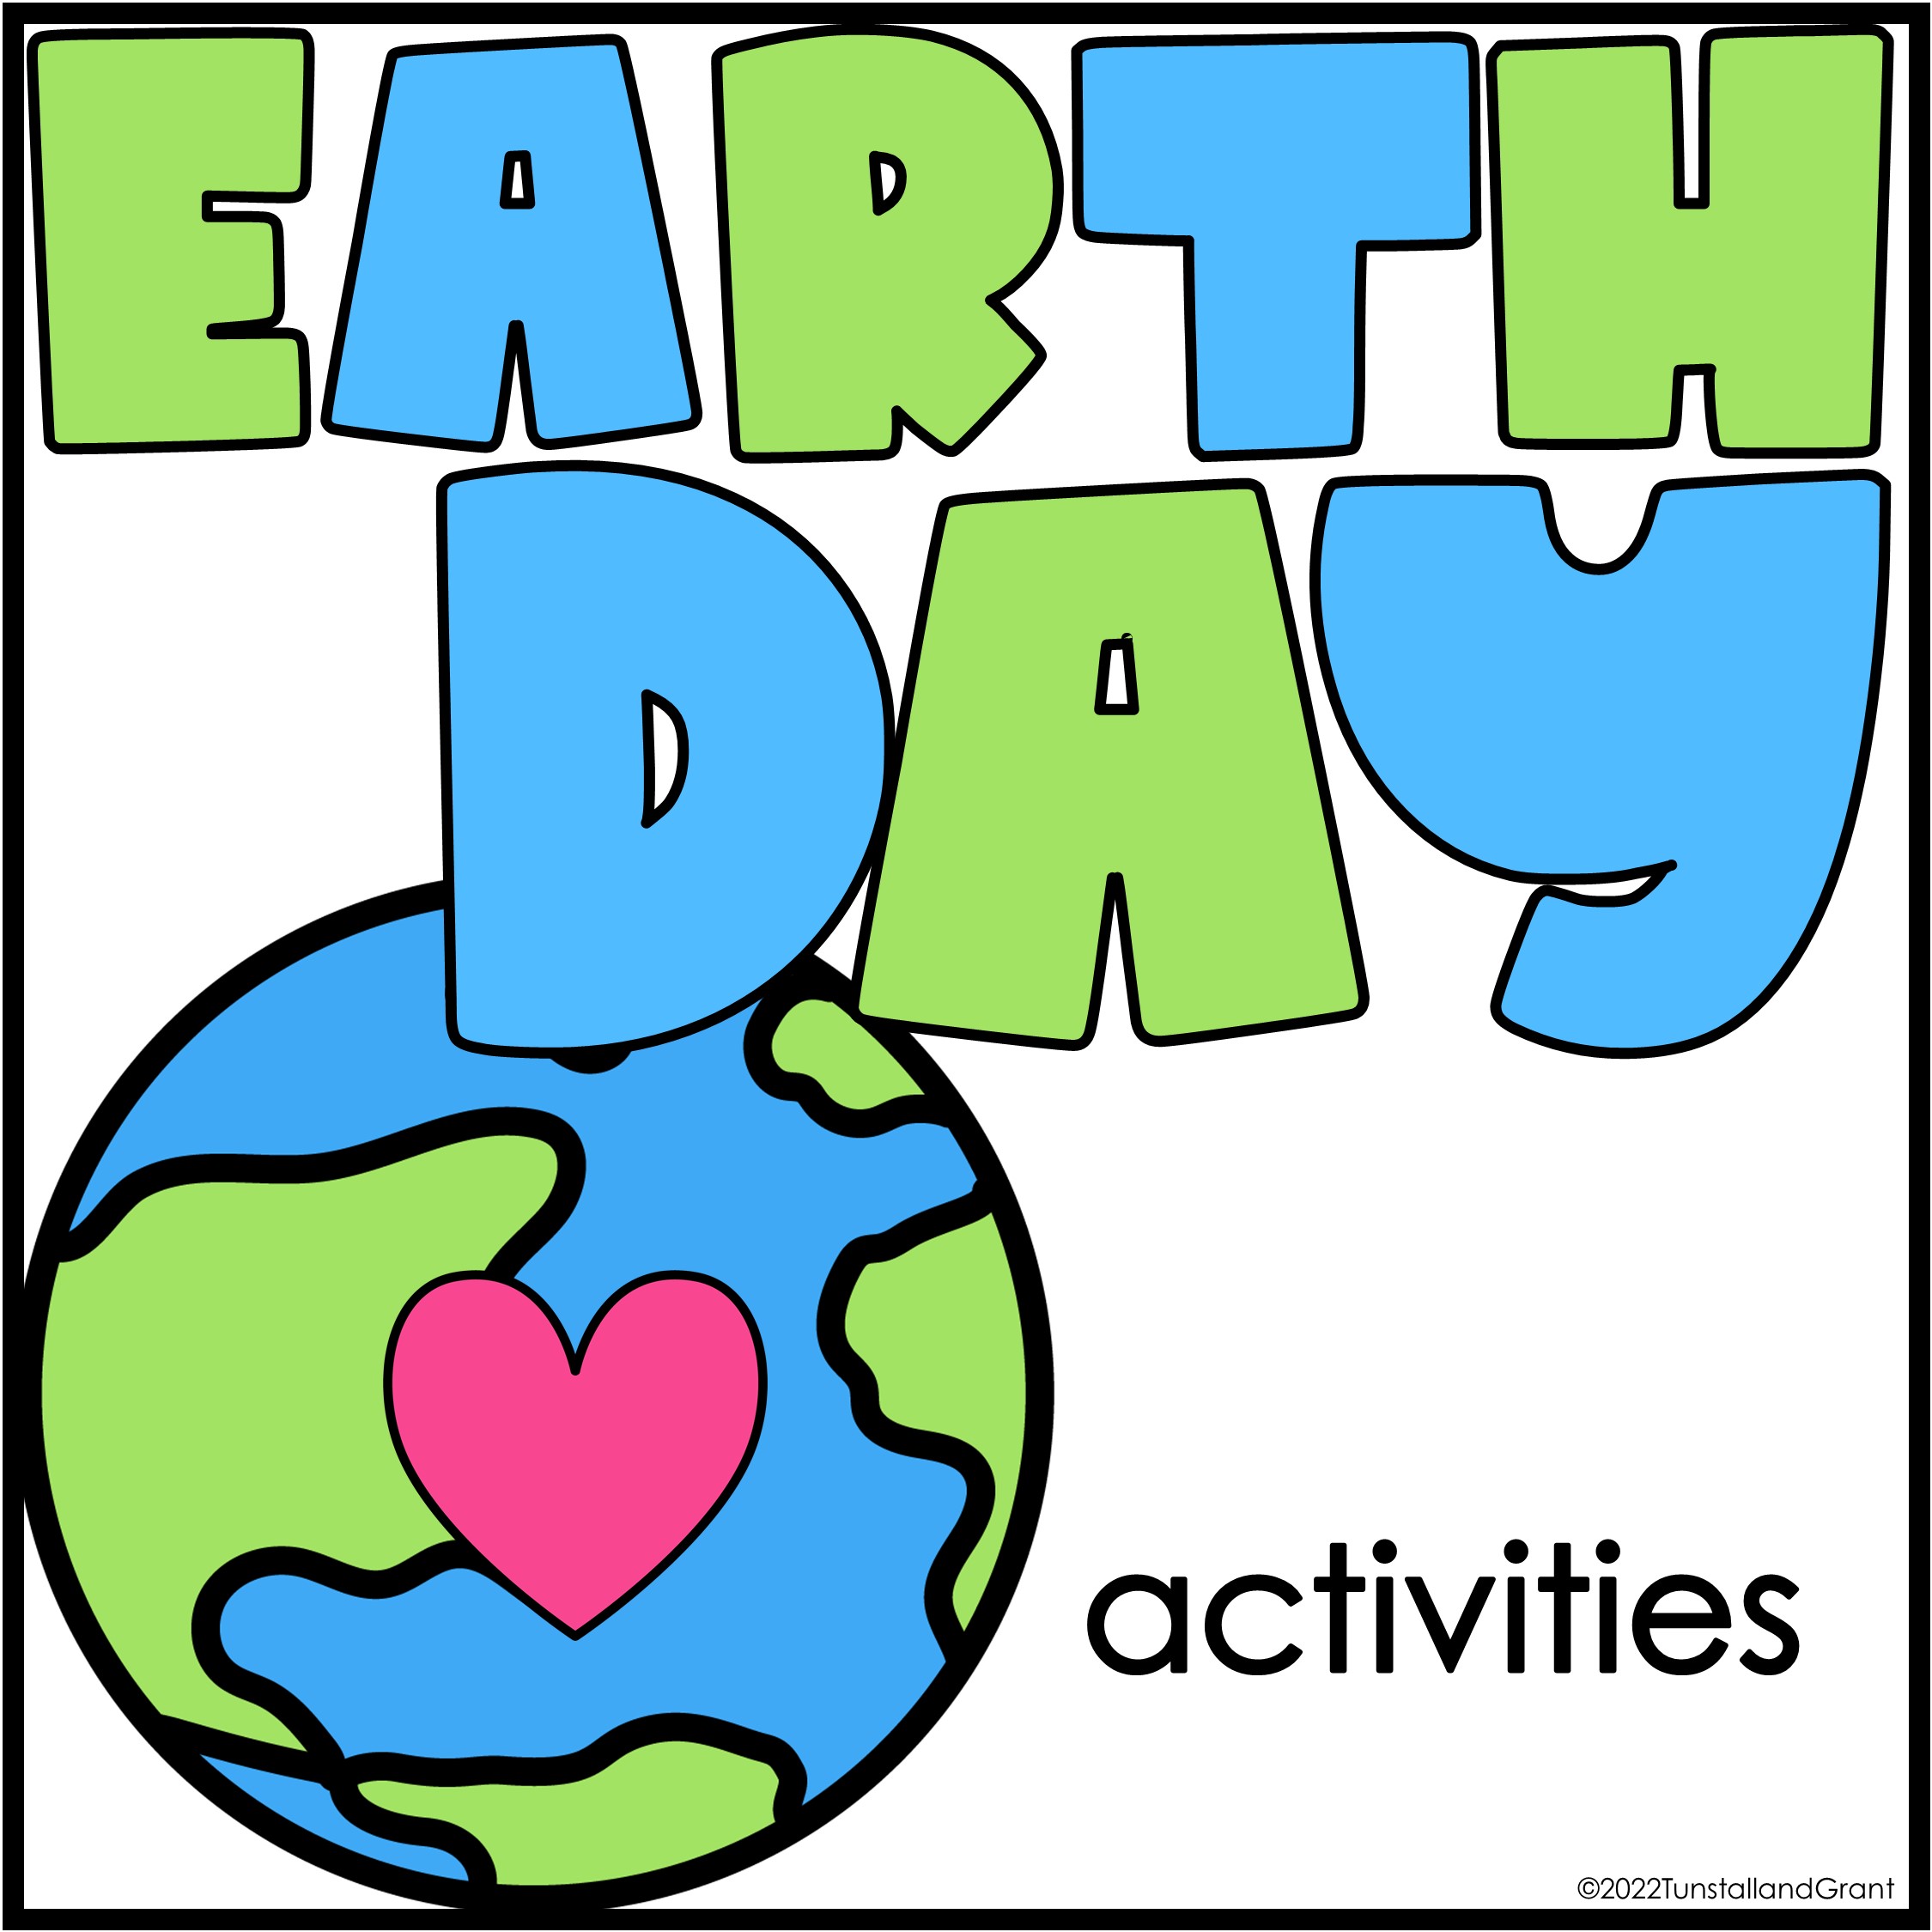 earth day activities